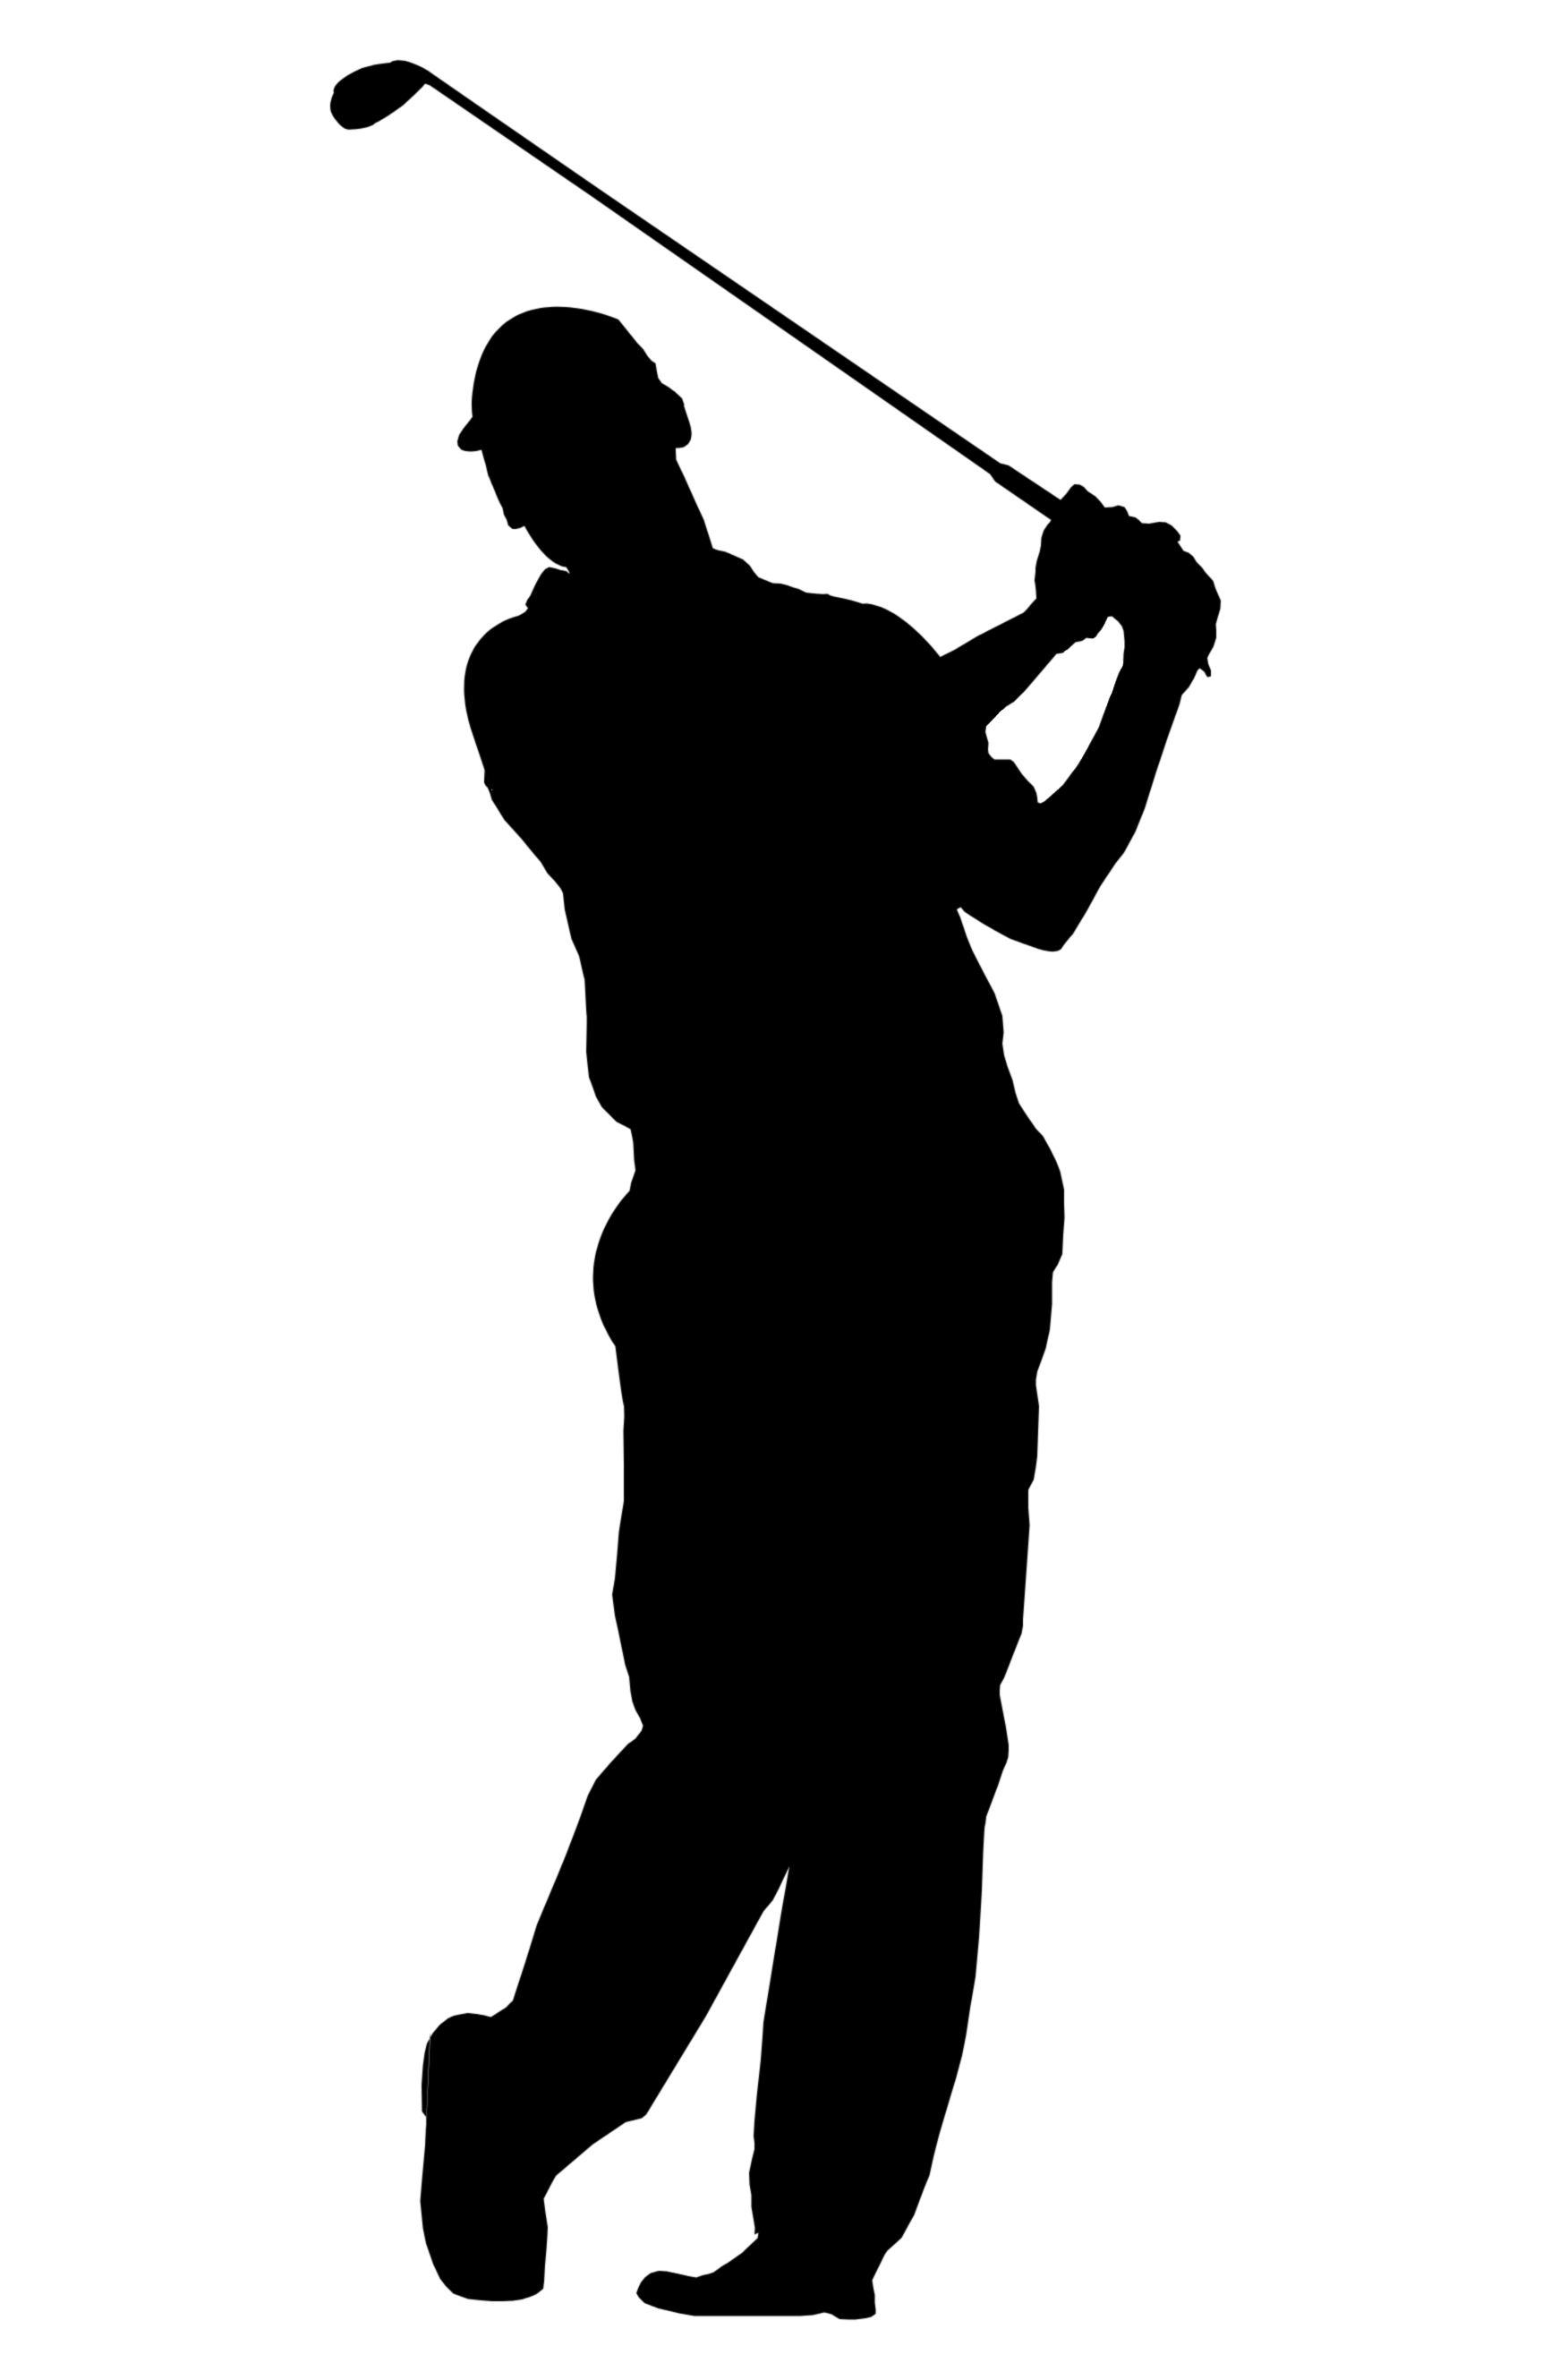 Golfer Images Cliparts.co